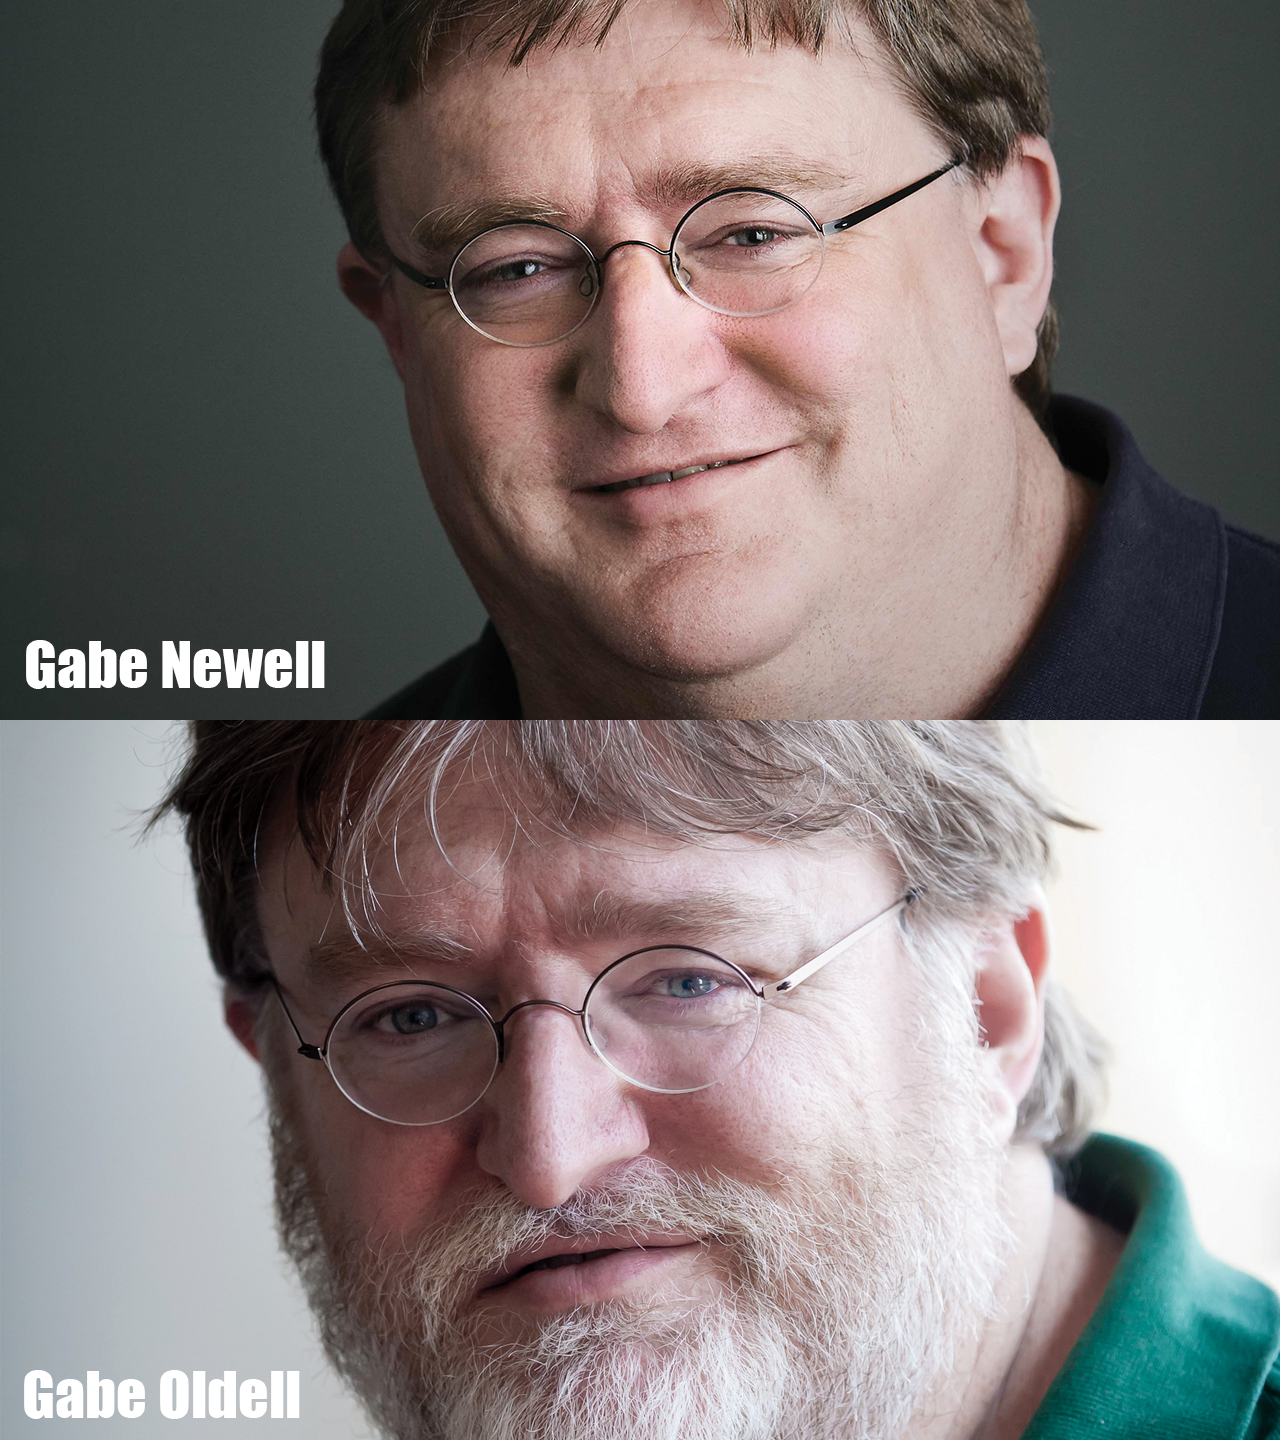 GLORIOUS 720p PNG.. >Gabe is old and grey Please Gabe the world need...